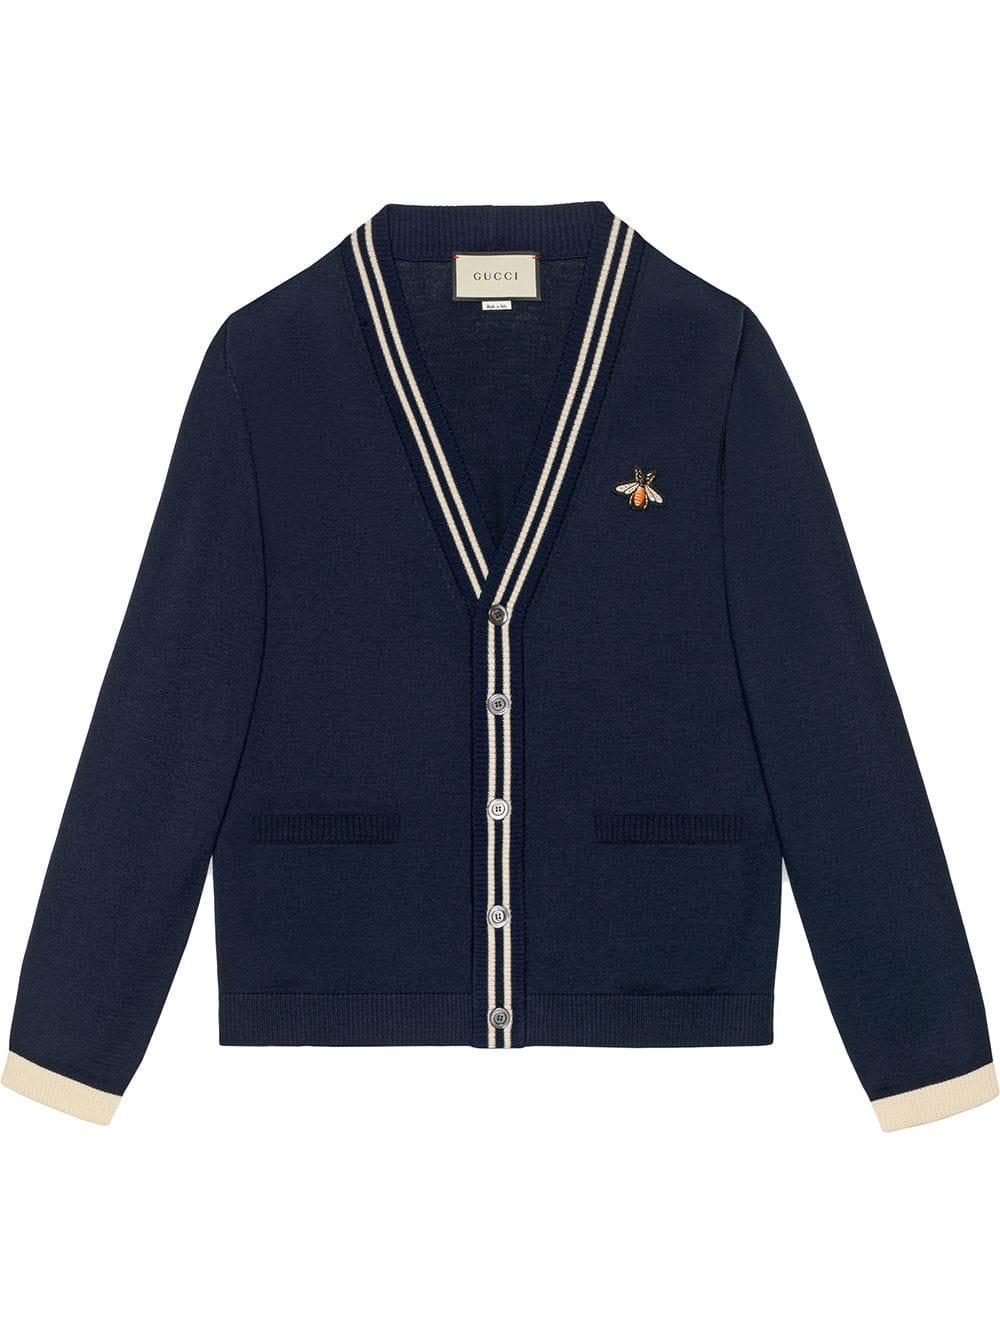 Gucci Cardigan Wool Knit With Bee in Blue for Men | Lyst